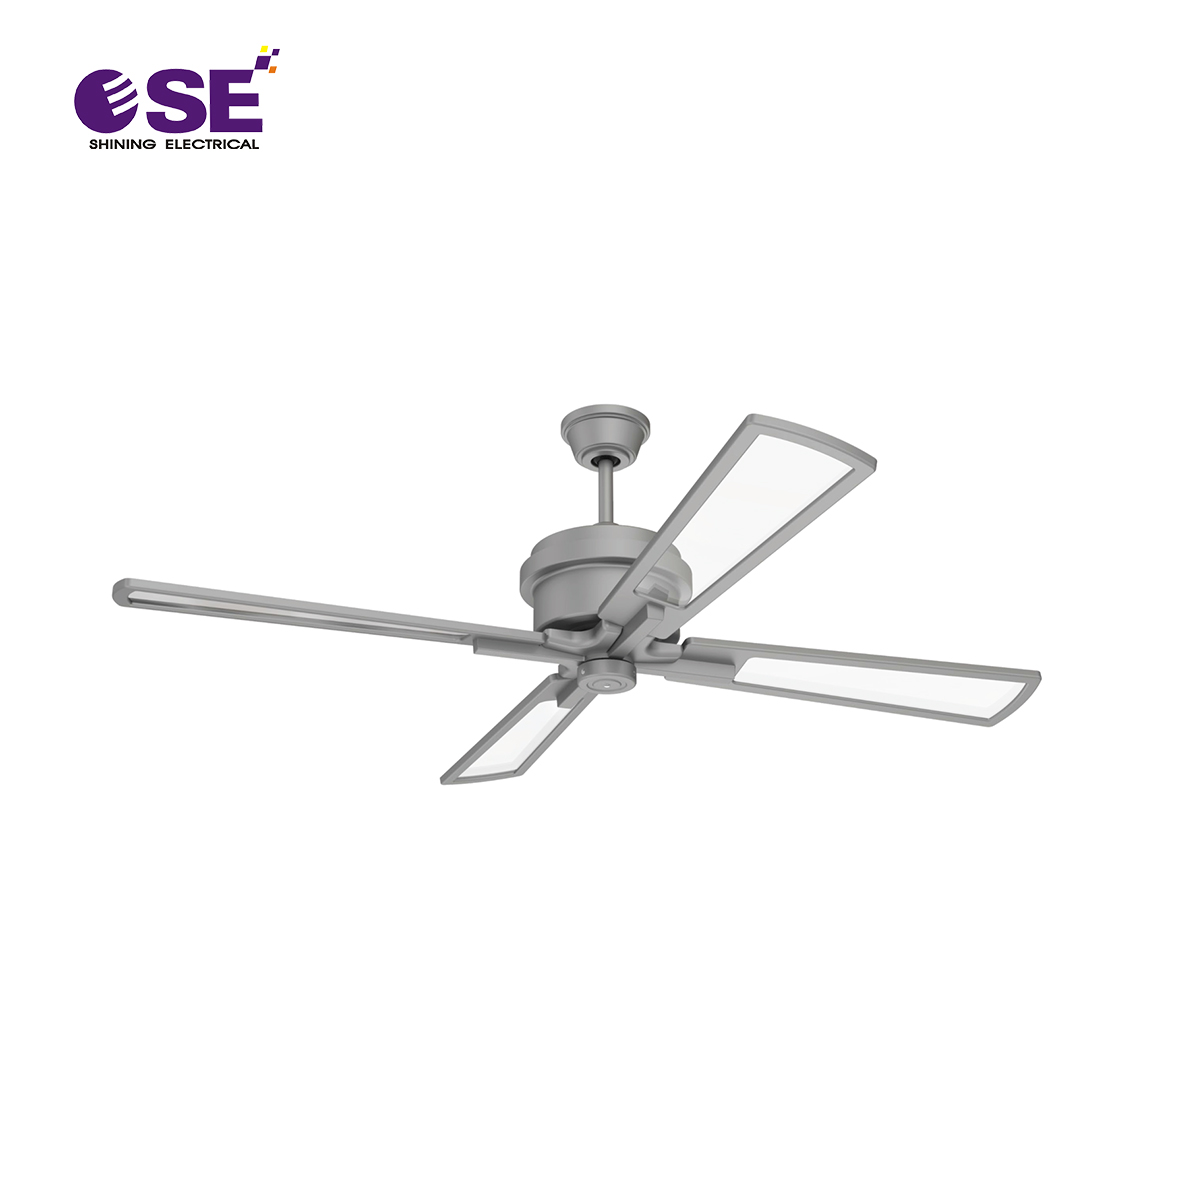 SPECIAL PC blades 52 inch wholesale decorative ceiling fan without light